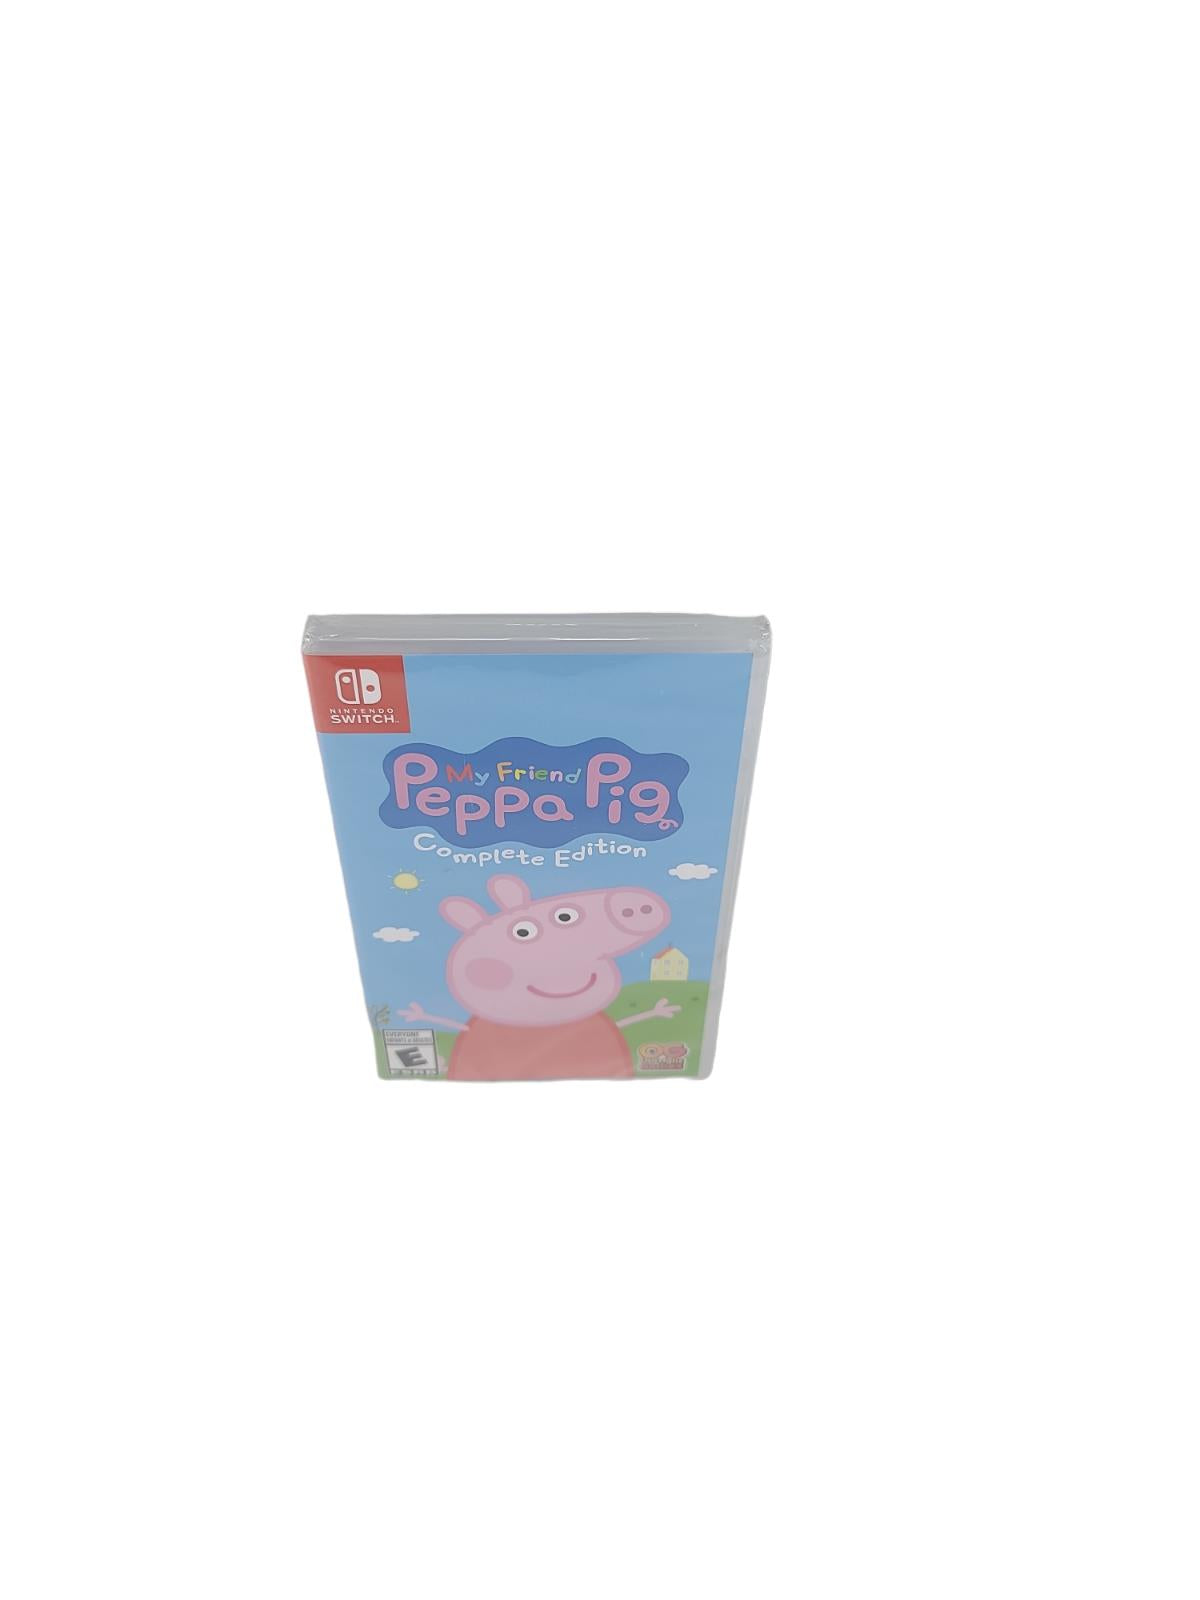 My Friend Peppa Pig Complete Edition - Nintendo Switch New SEALED